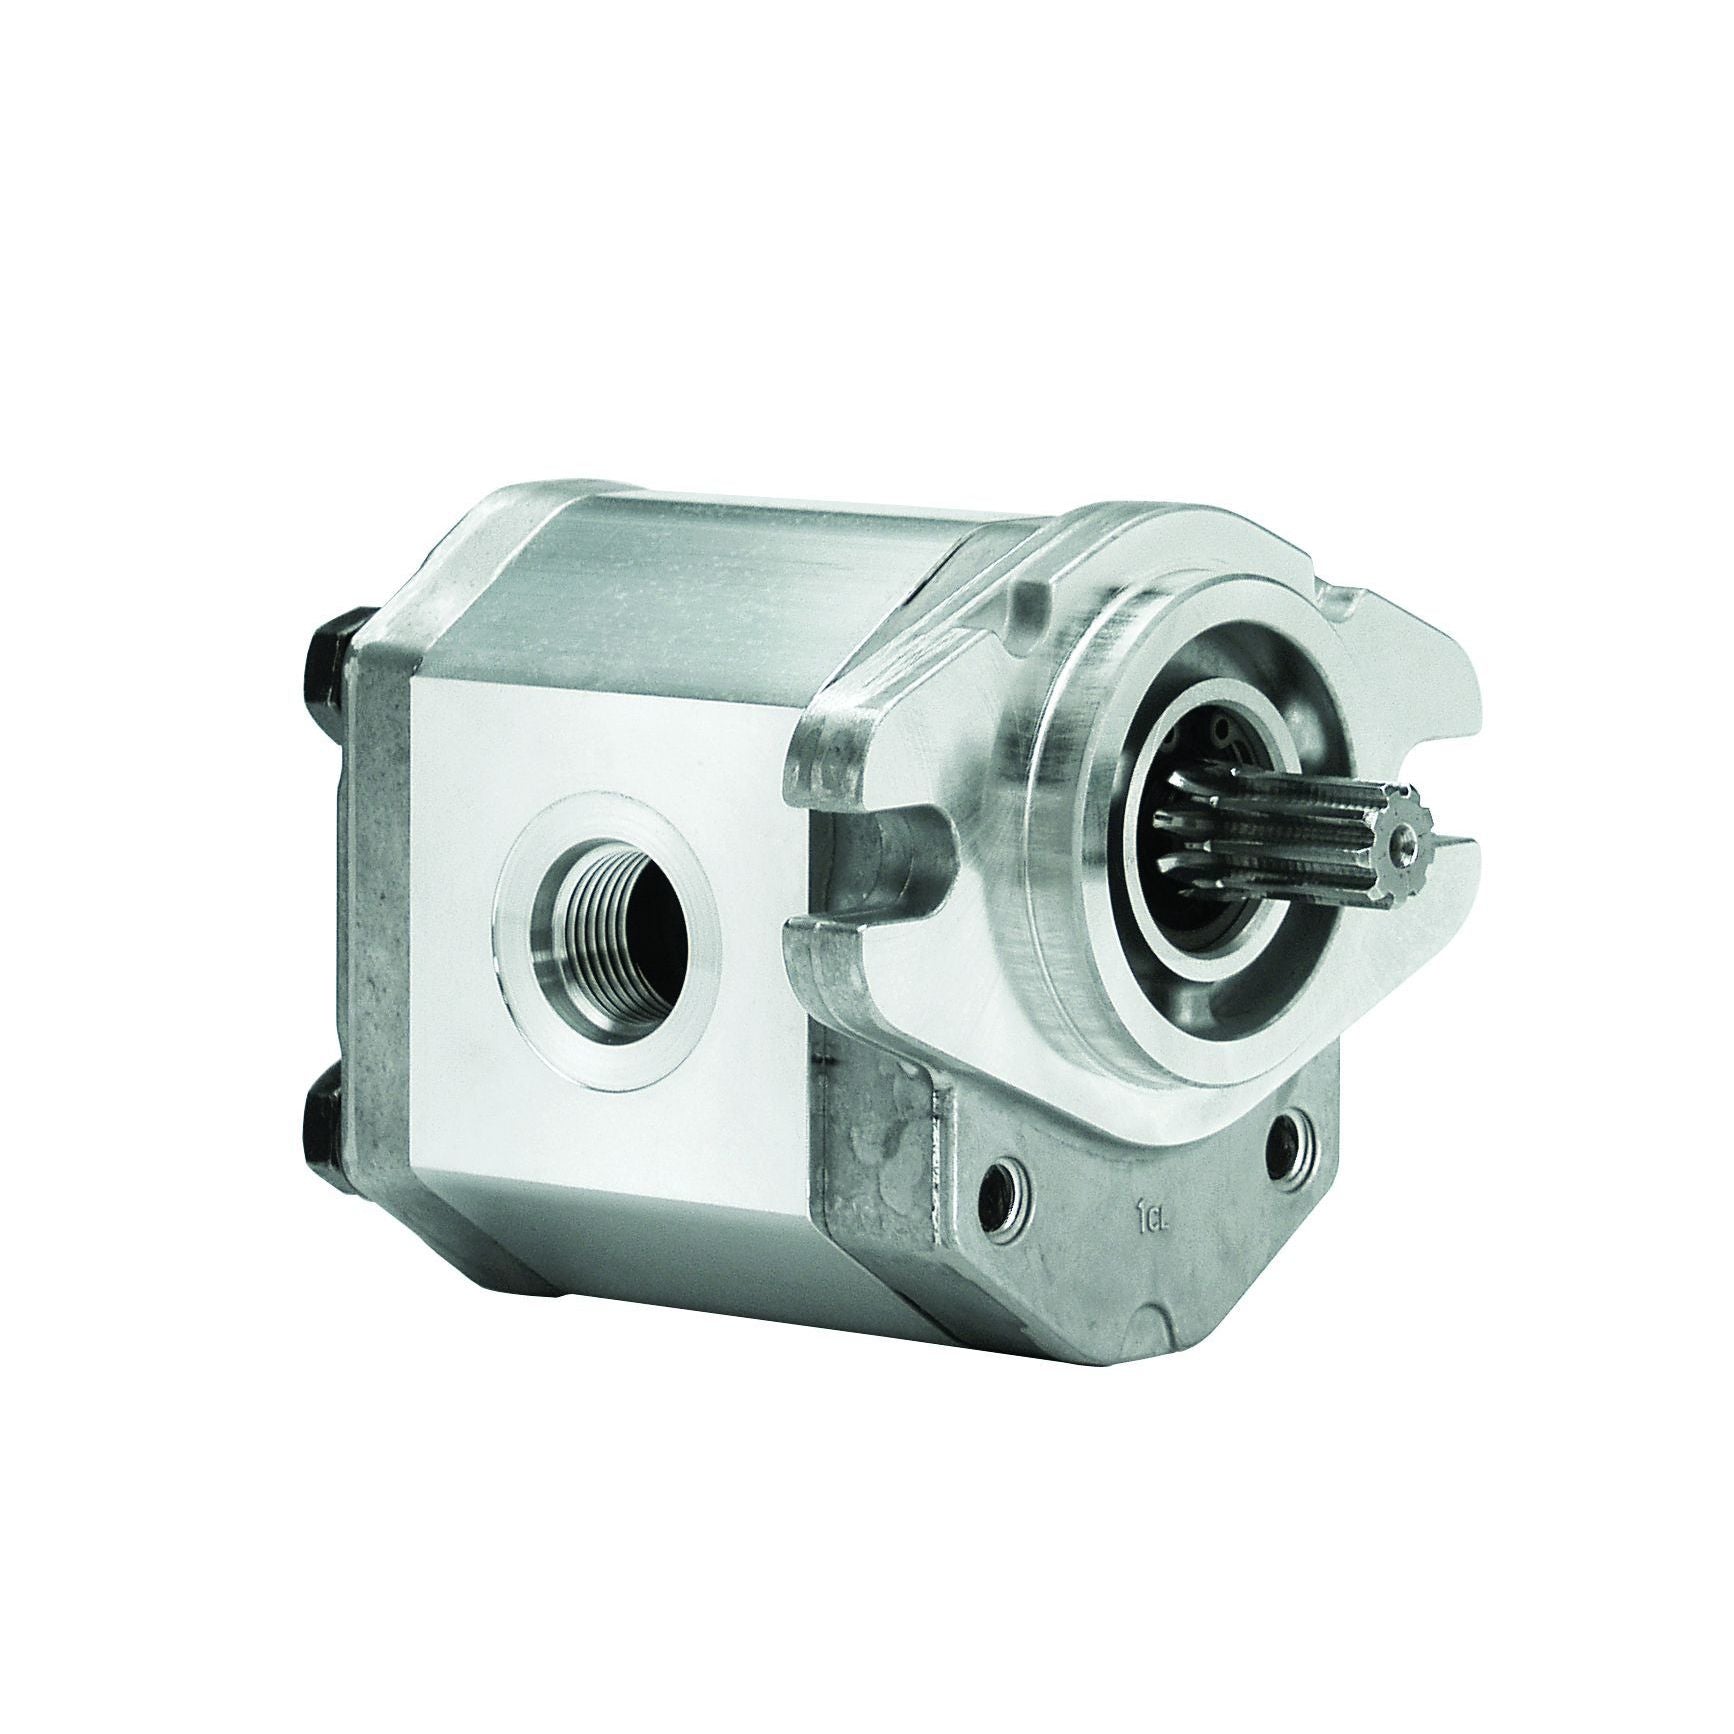 ALP2A-D-20-S1 : Marzocchi Gear Pump, CW, 14.1cc (0.8601in3), 6.7 GPM, 3335psi, 3200 RPM, #12 SAE (3/4") In, #10 SAE (5/8") Out, Splined Shaft 9T 16/32DP, SAE A 2-Bolt Mount